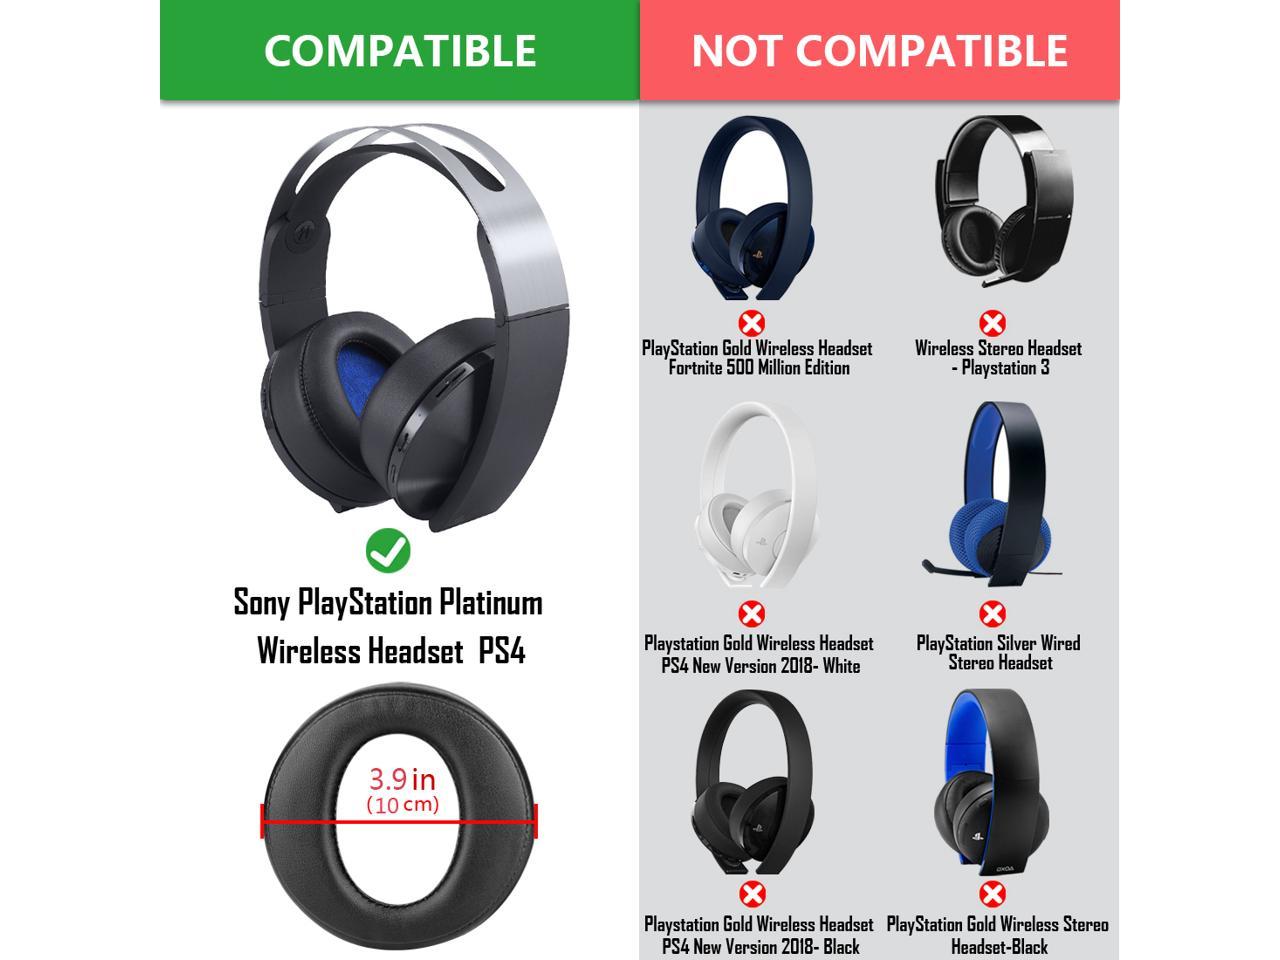 ps4 platinum headset replacement dongle